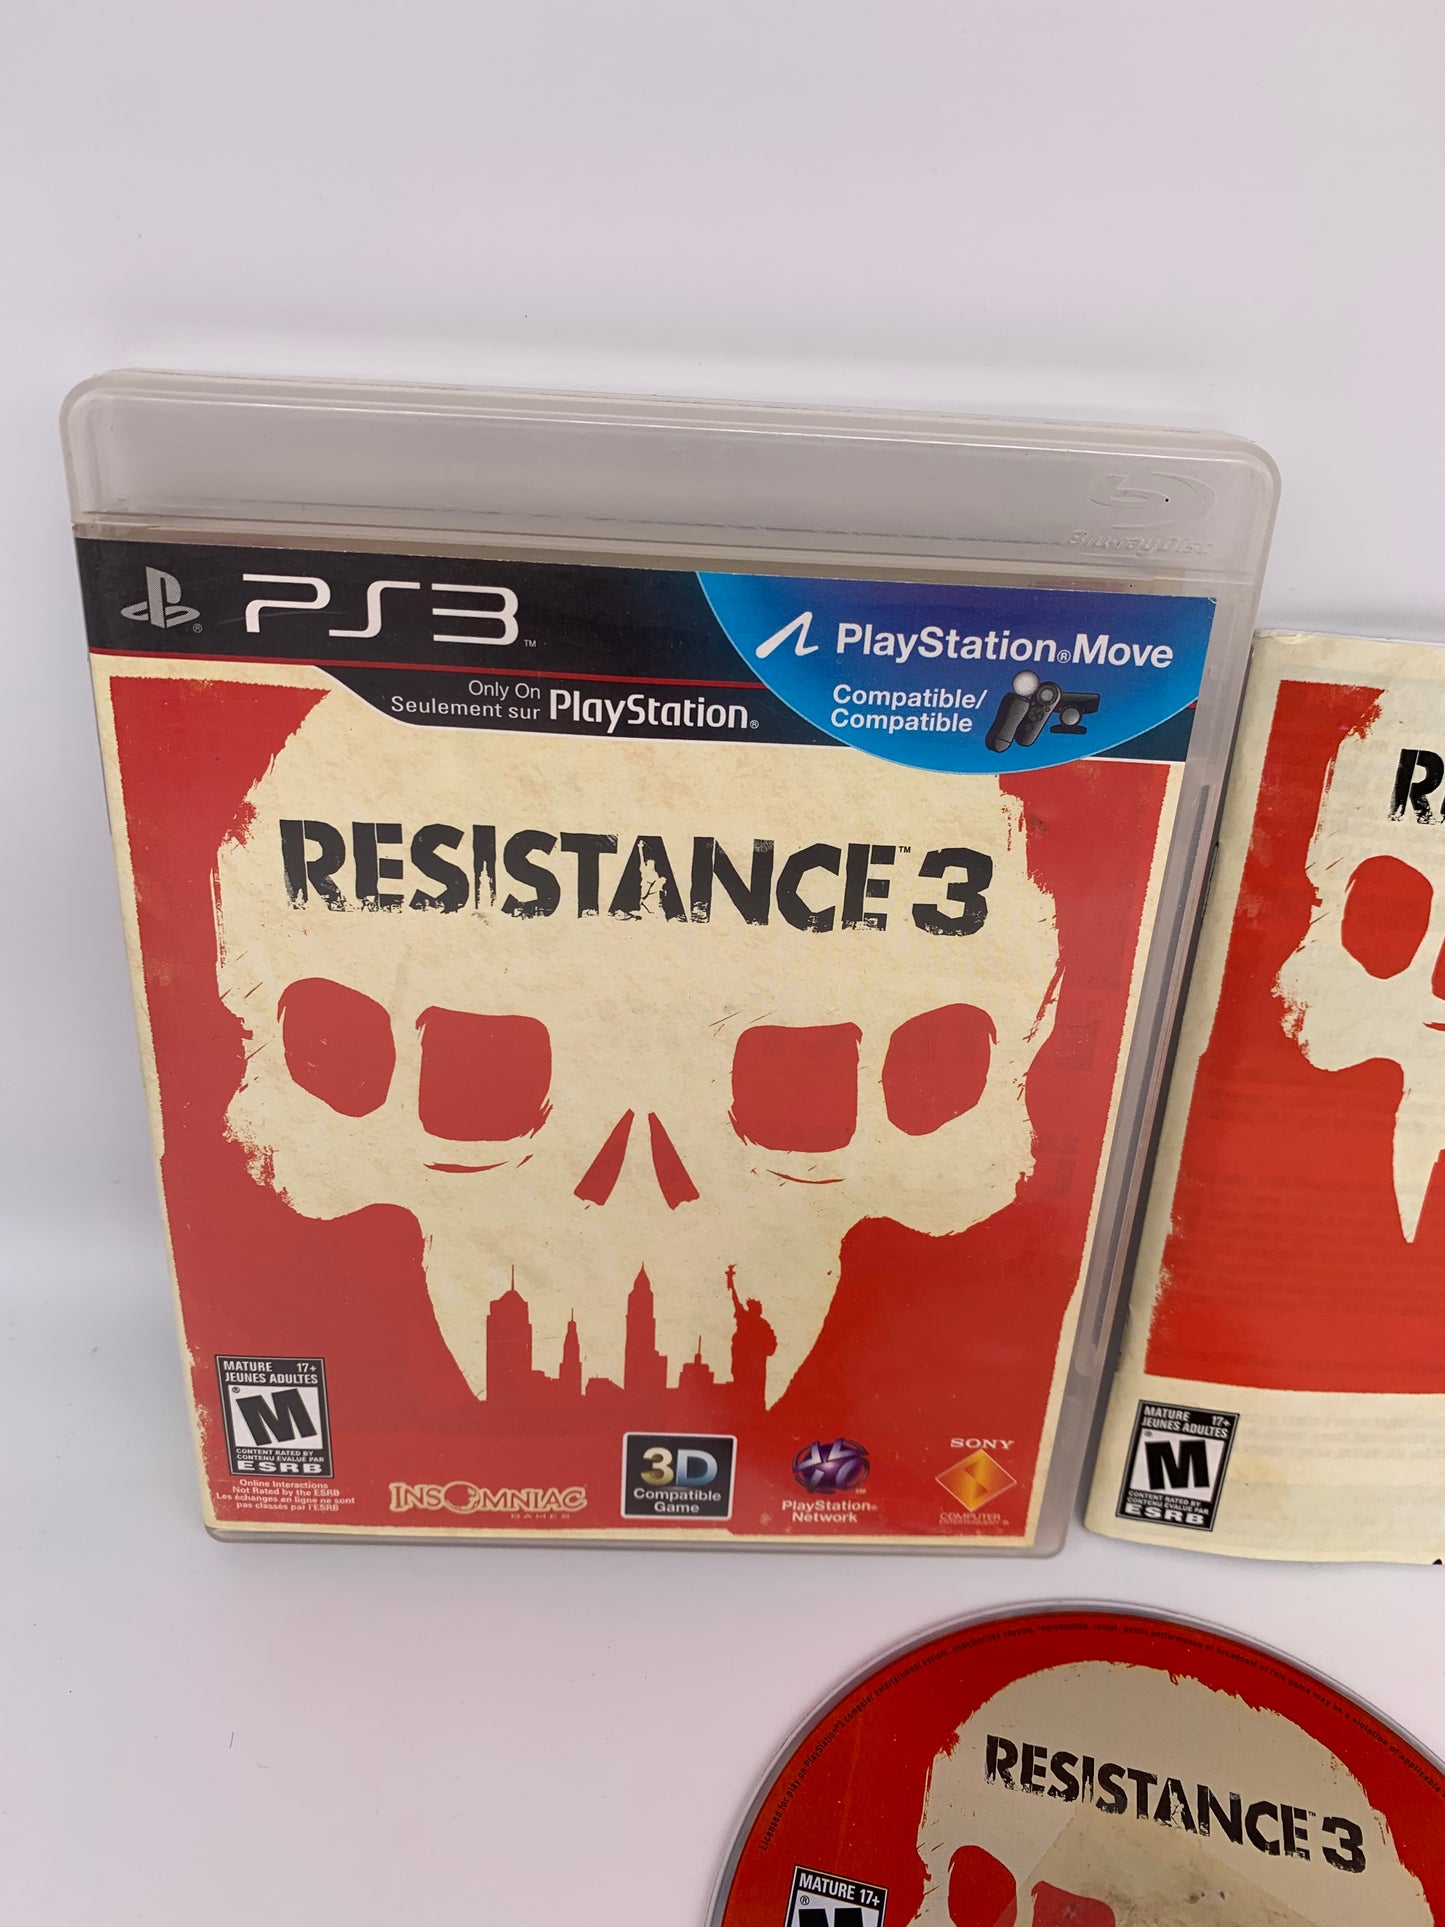 SONY PLAYSTATiON 3 [PS3] | RESiSTANCE 3